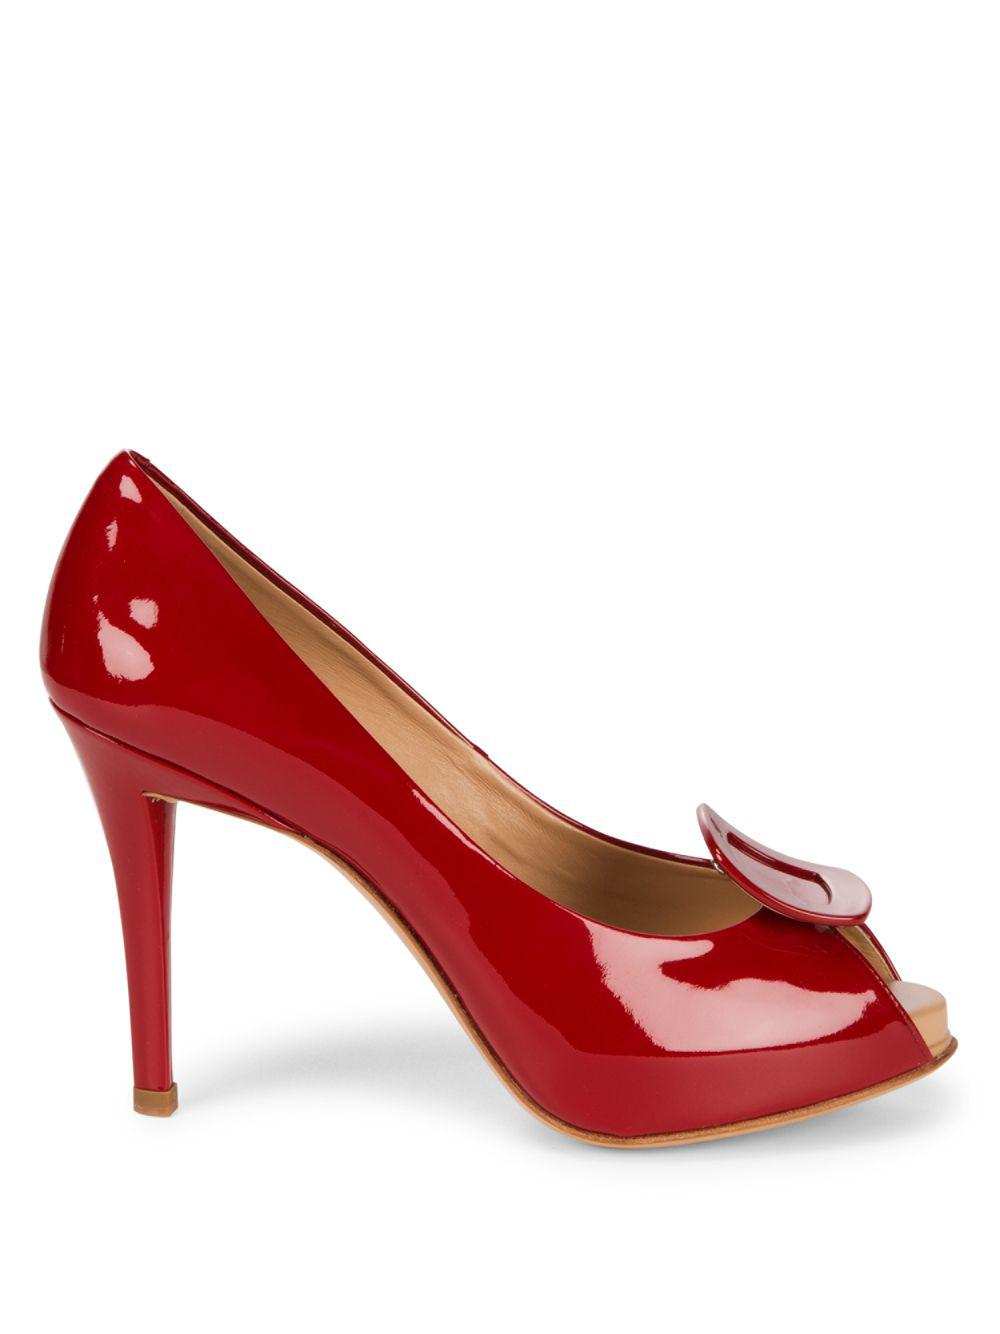 Roger Vivier Patent Leather Stiletto Heels in Ruby (Red) - Lyst